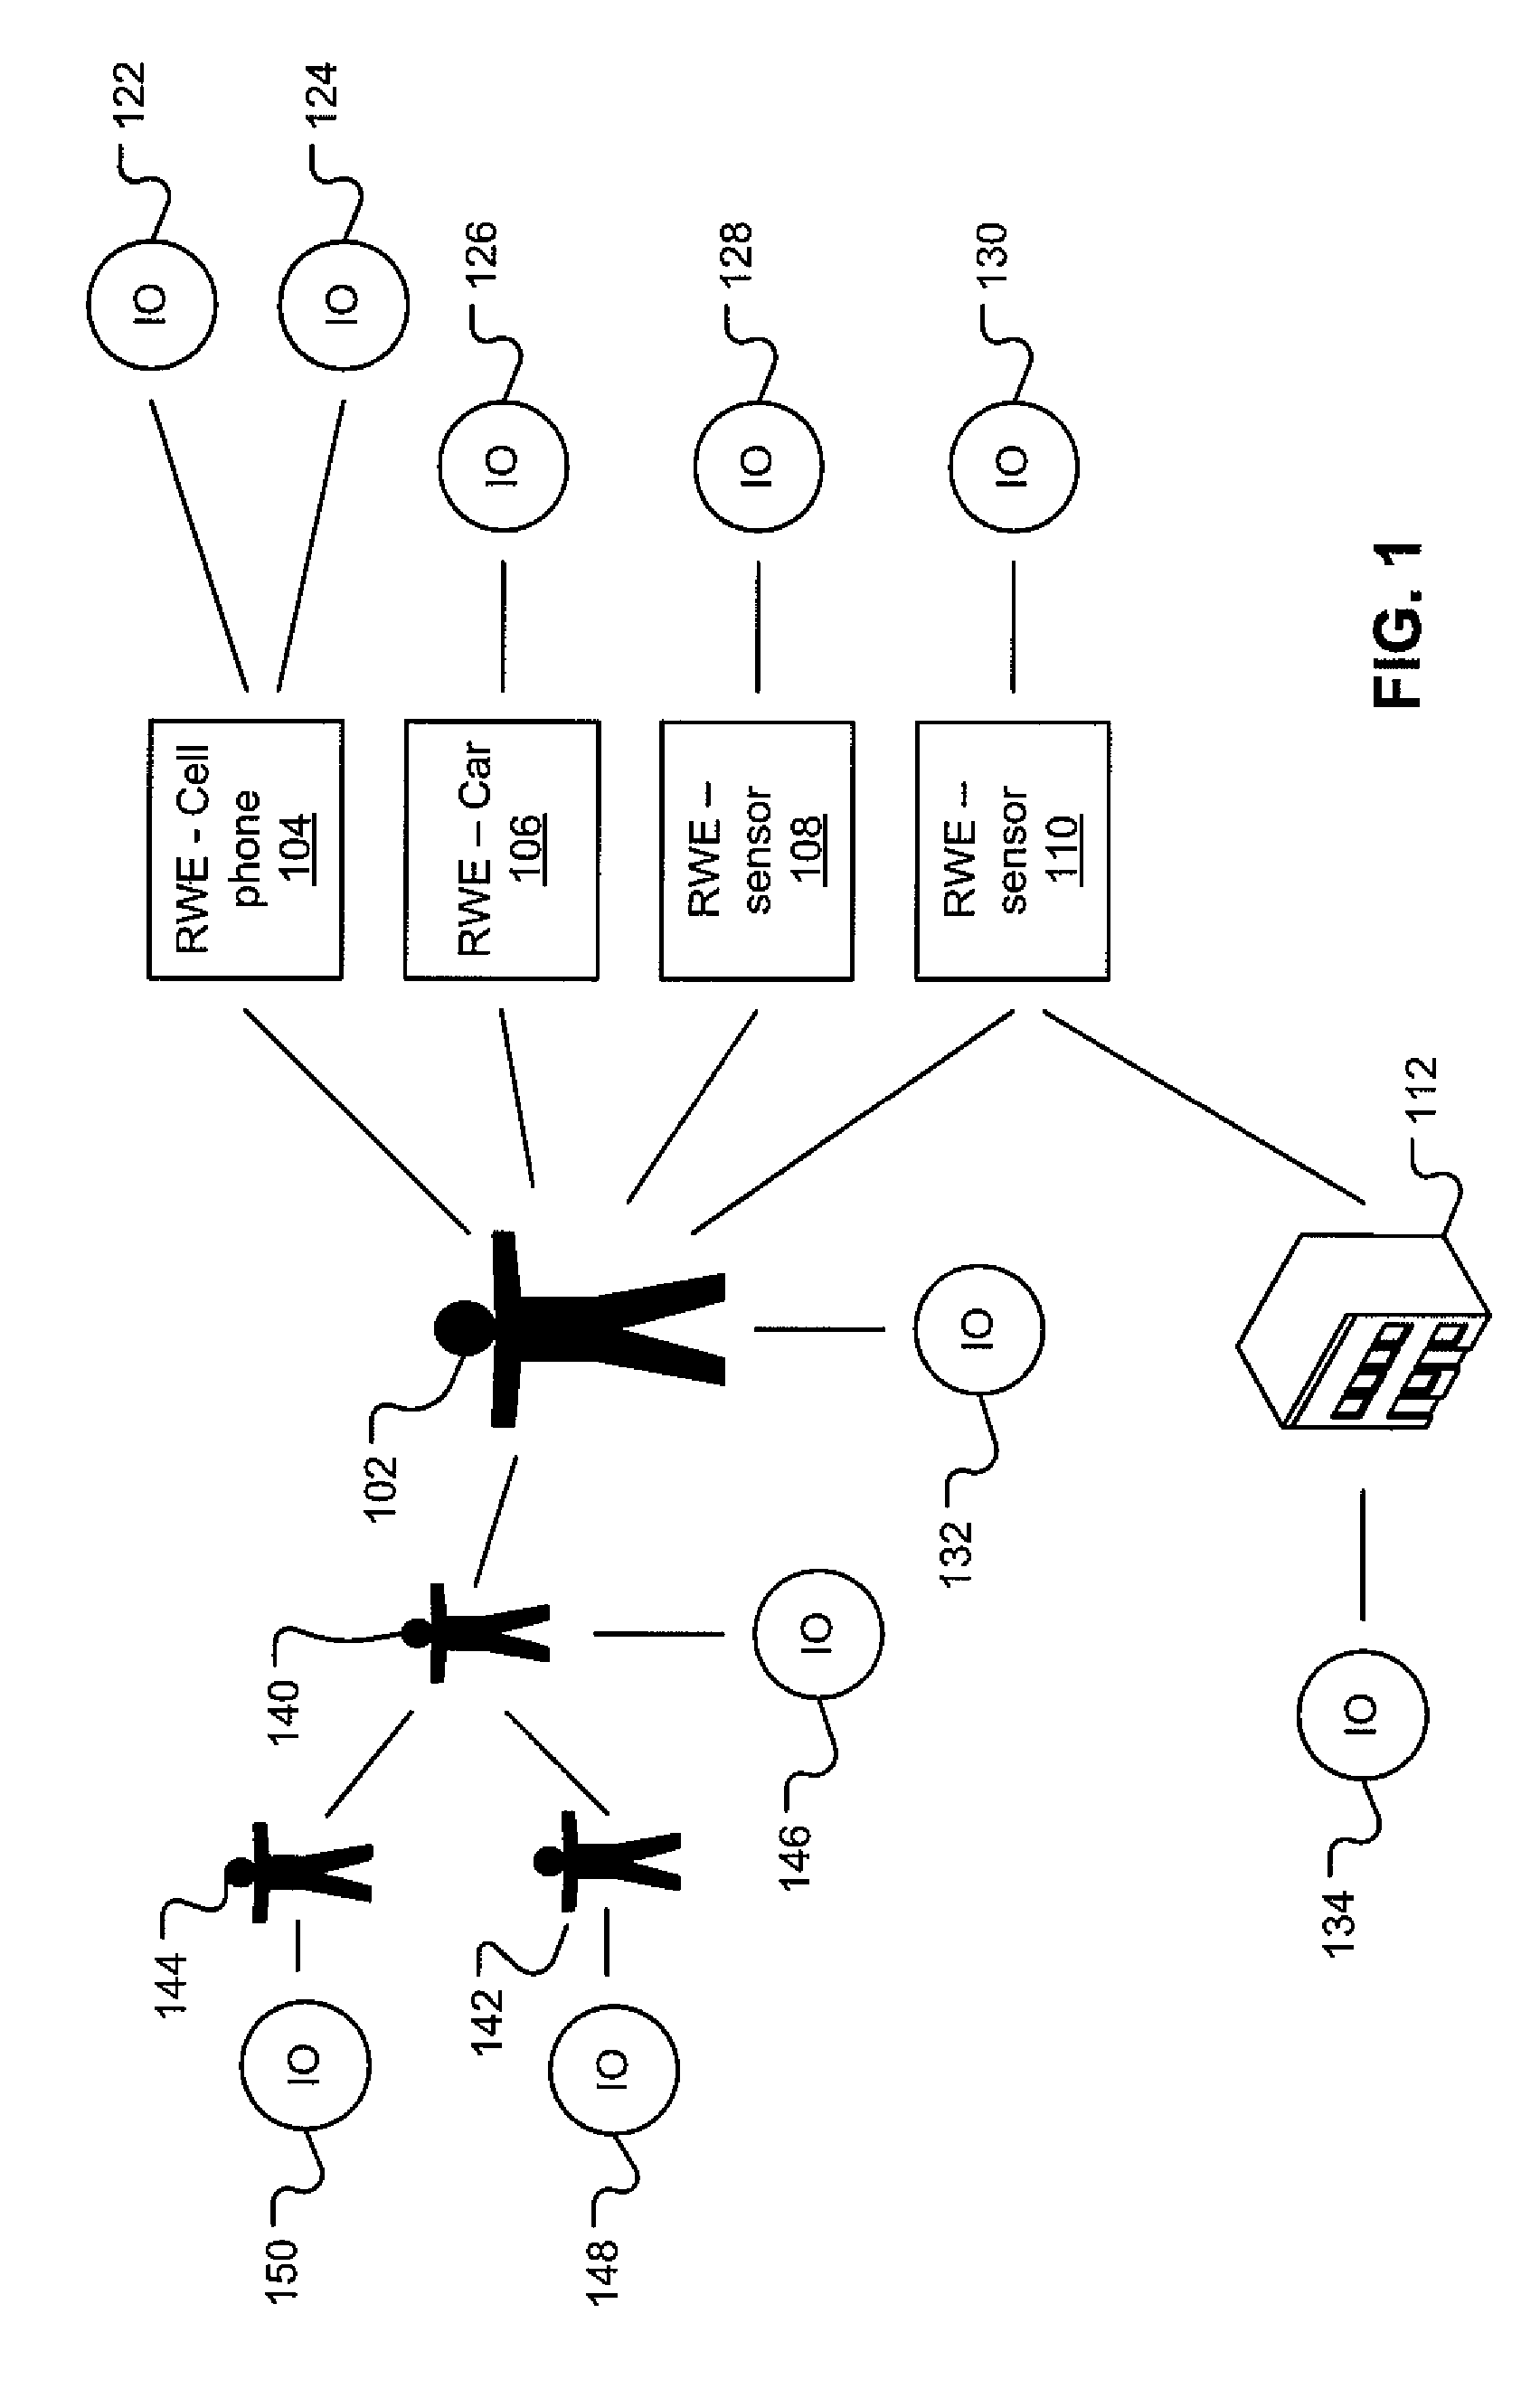 System and method for generation of URL based context queries